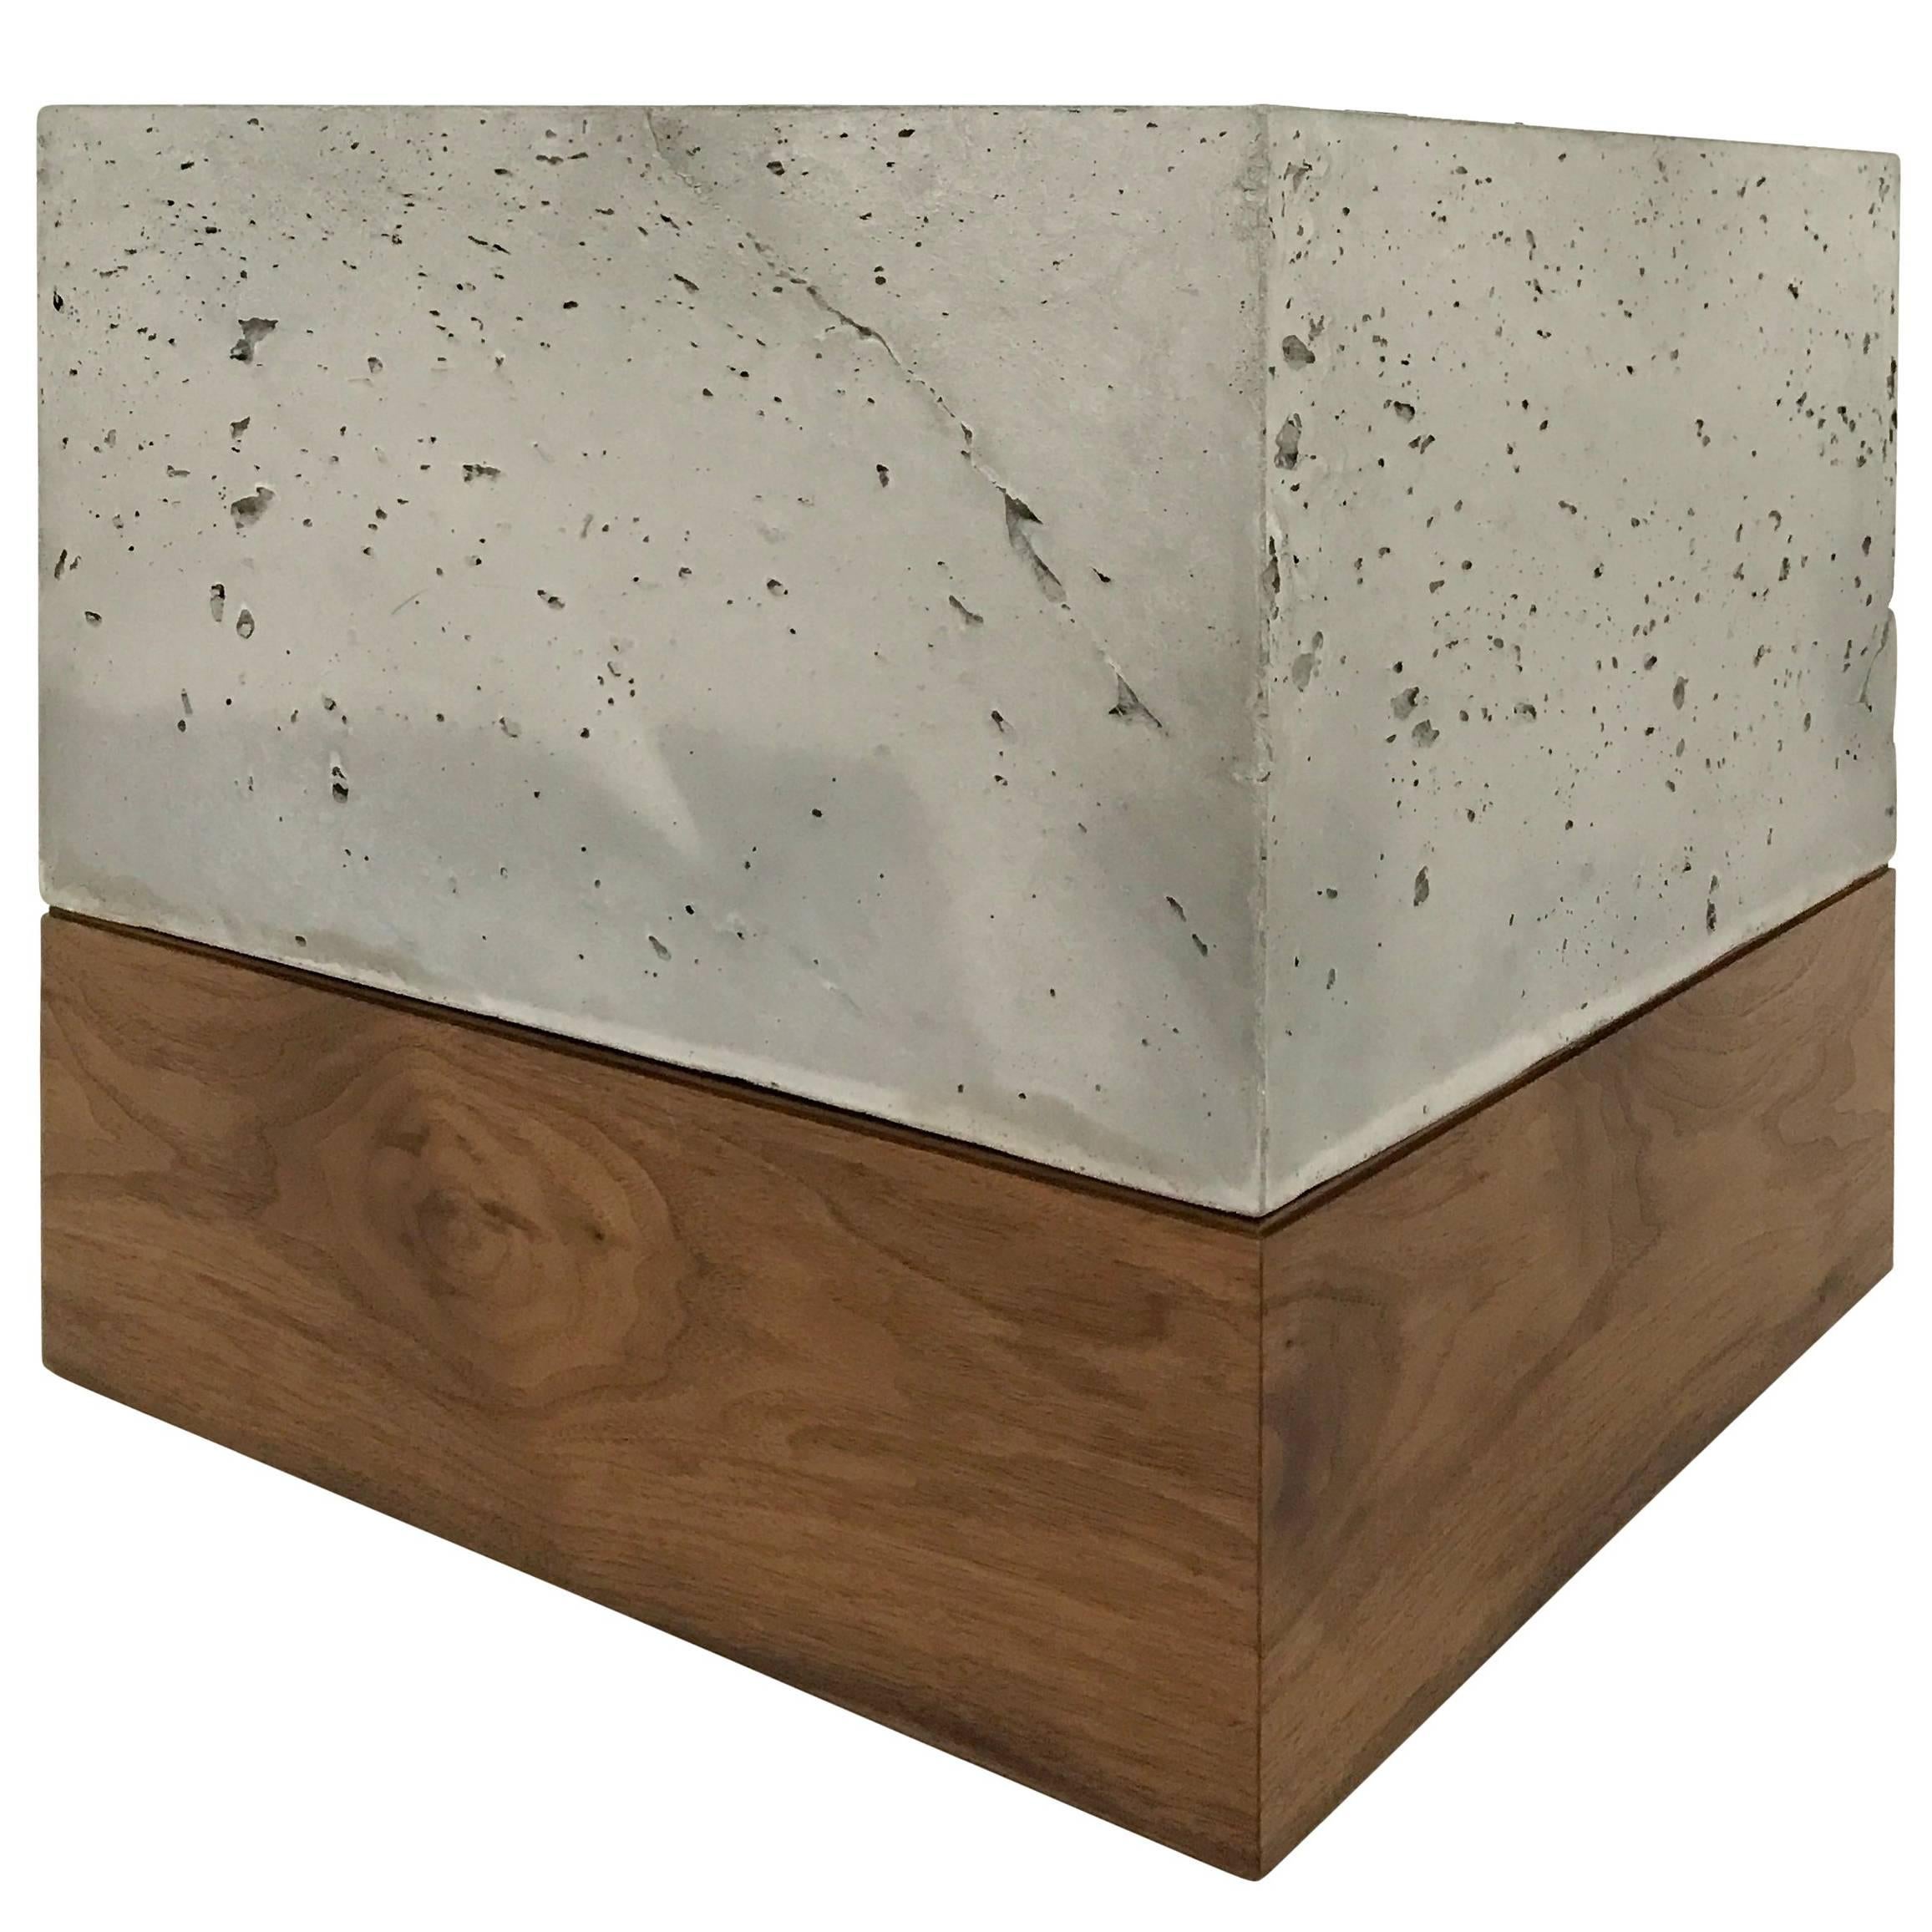 Modern Cast-Concrete and Solid Walnut "Planter Box" For Sale